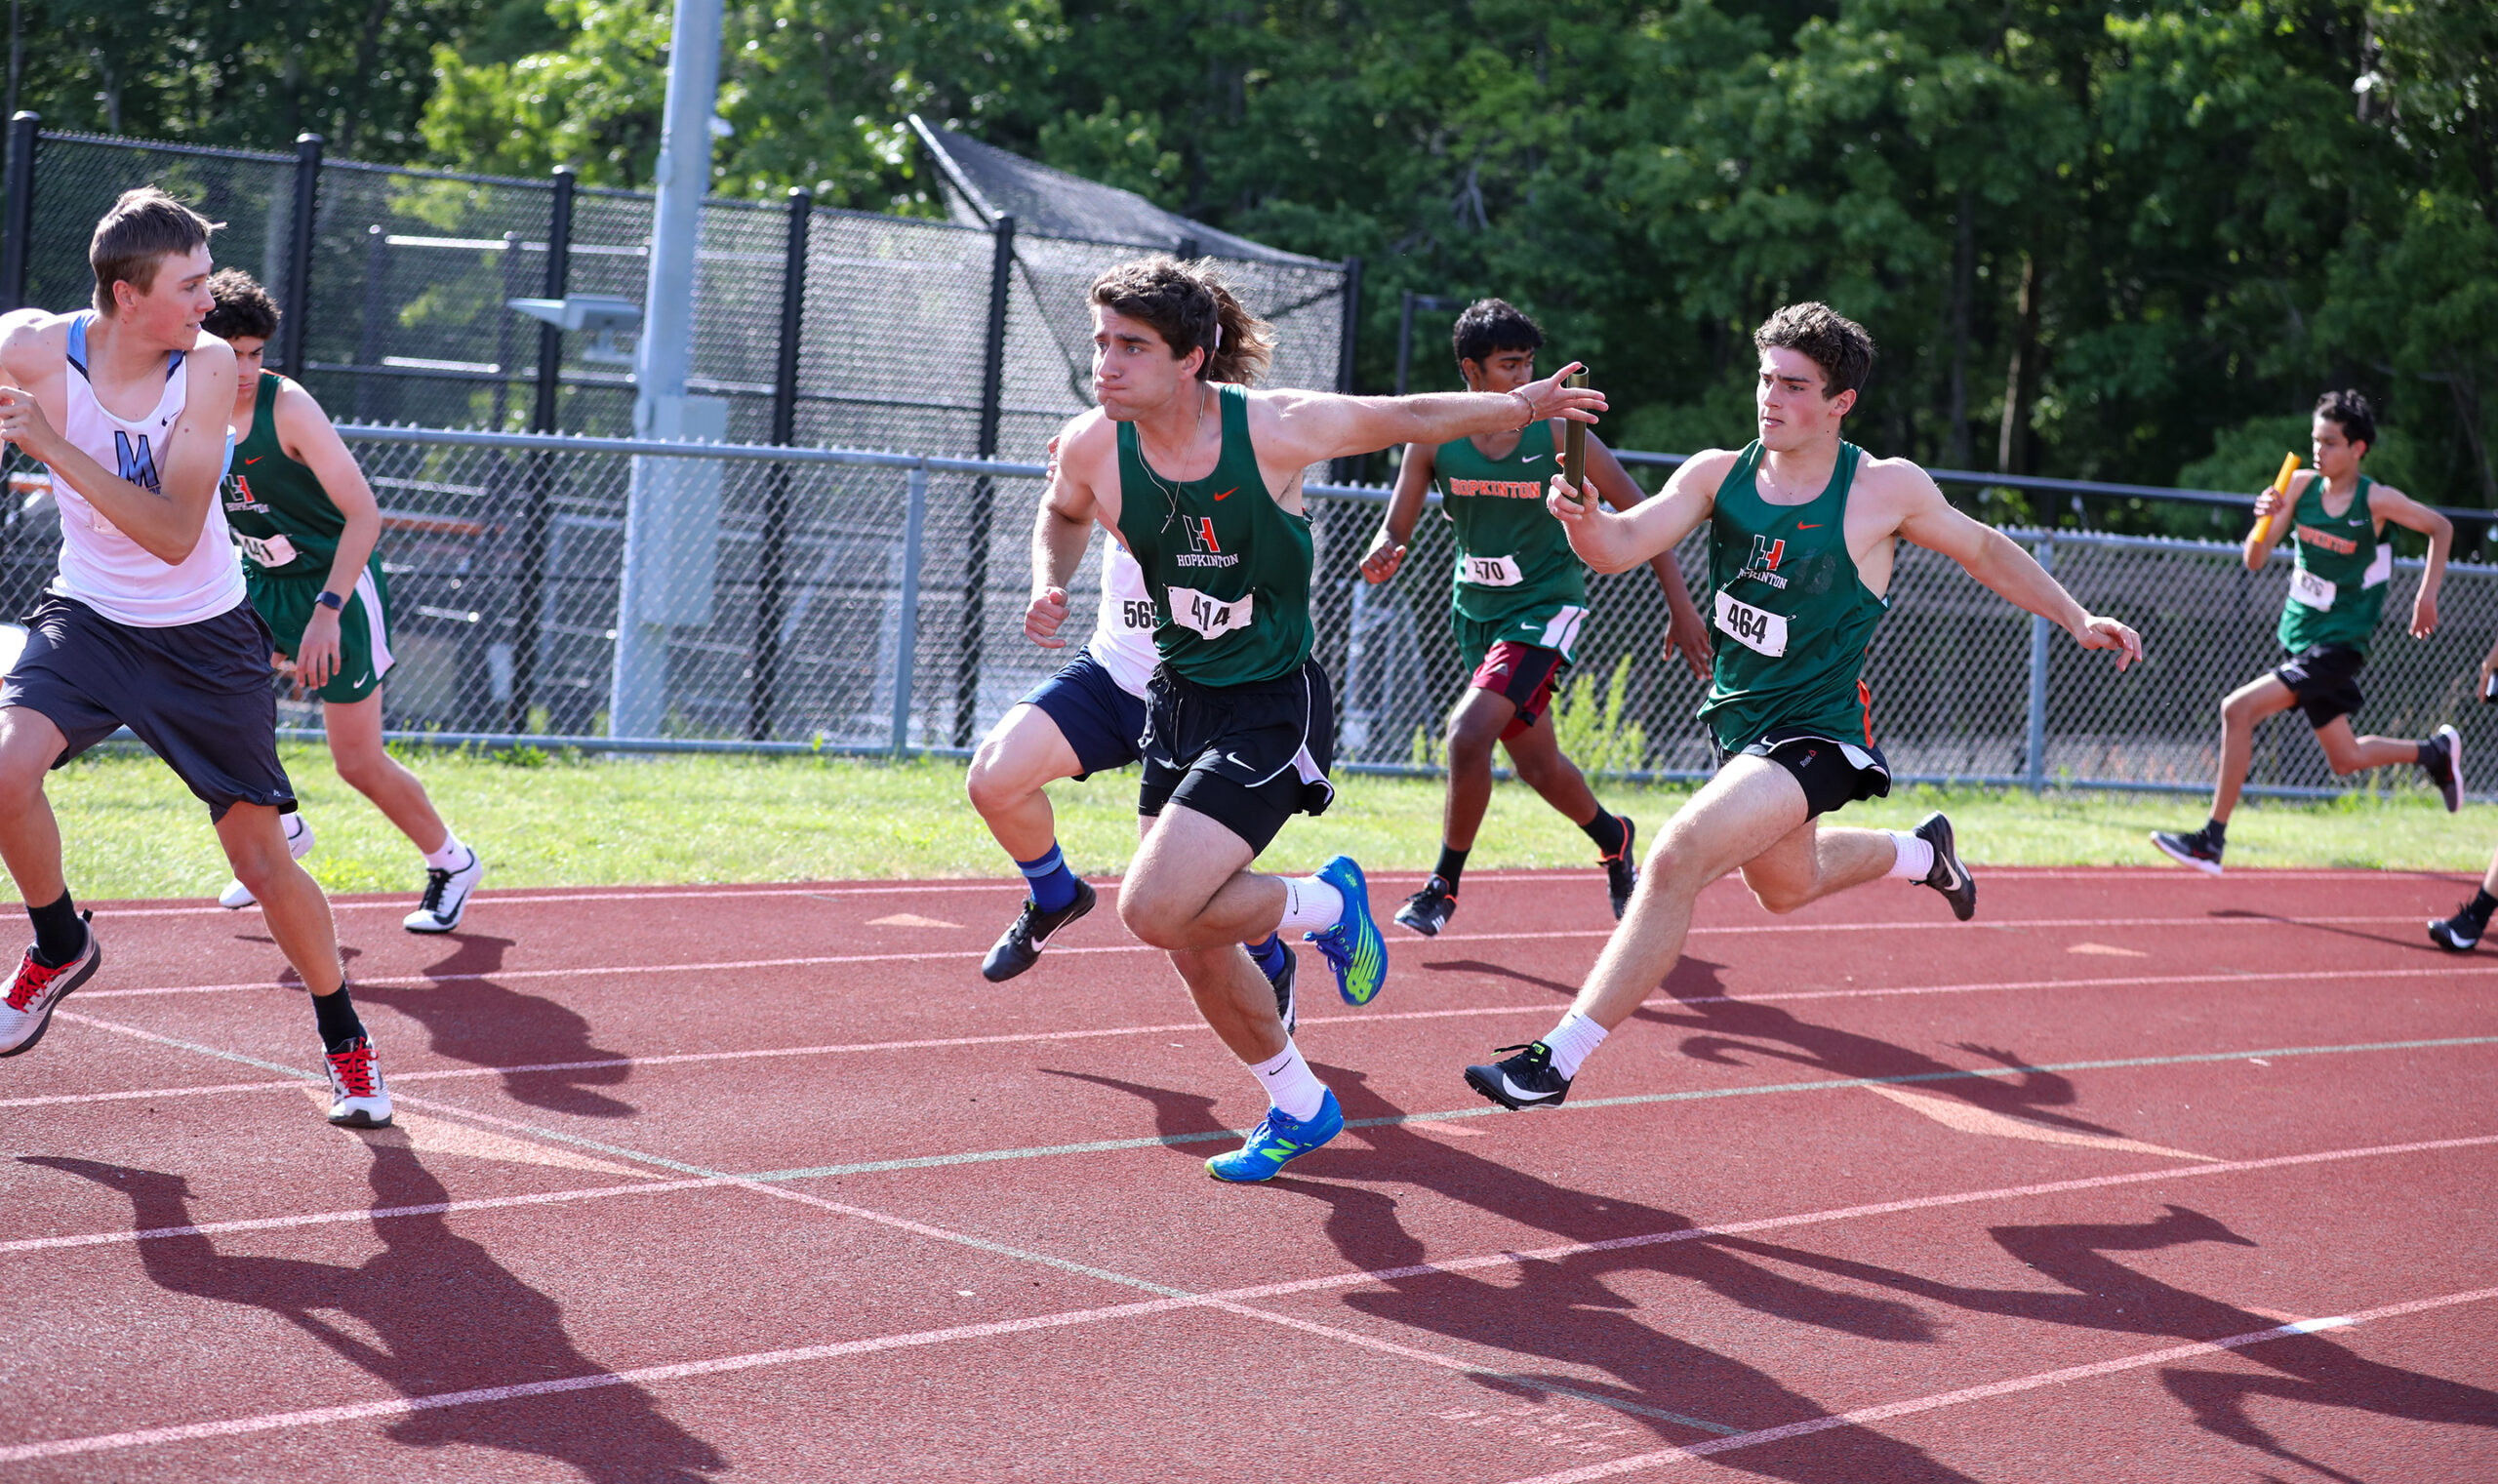 Senior class leads Hillers boys track